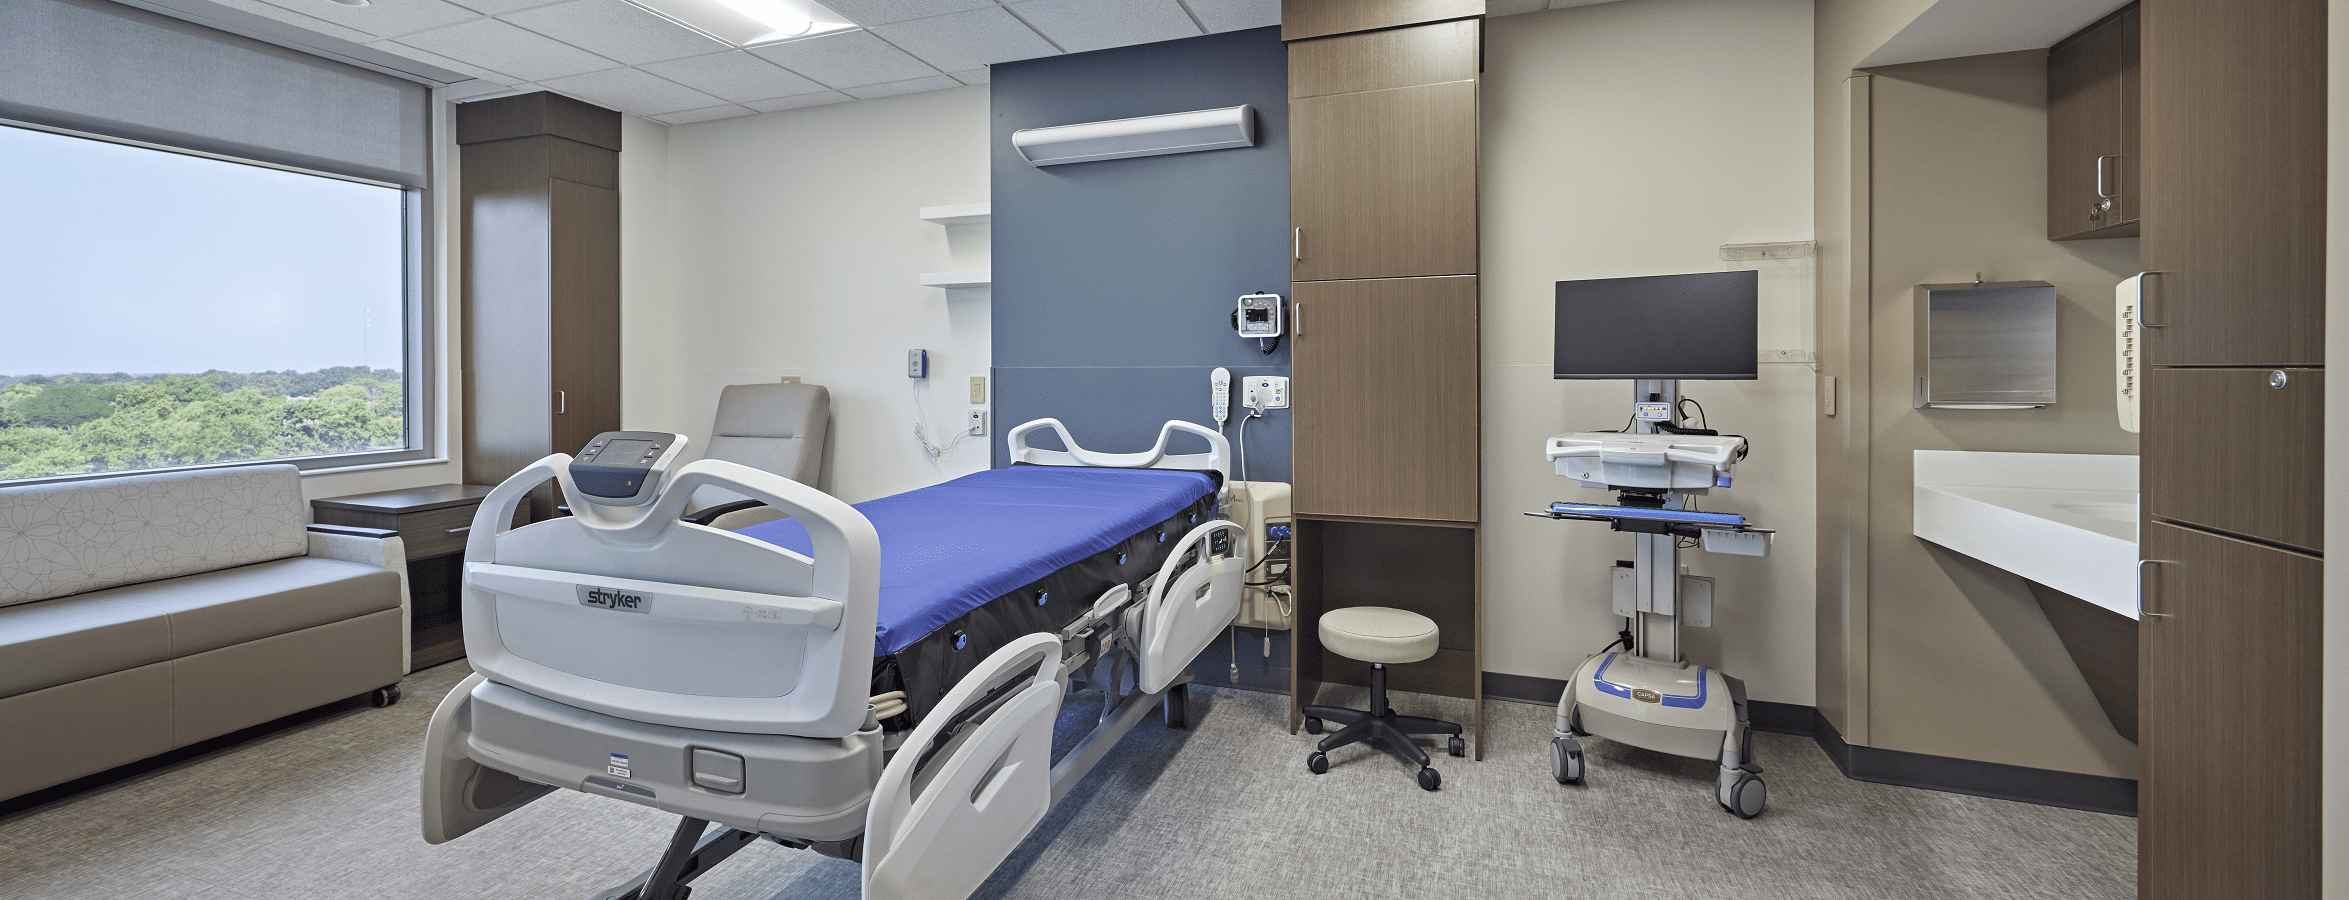 The interior of a freshly renovated patient room at Mercy Health St. Rita's Medical Center in Lima, OH.